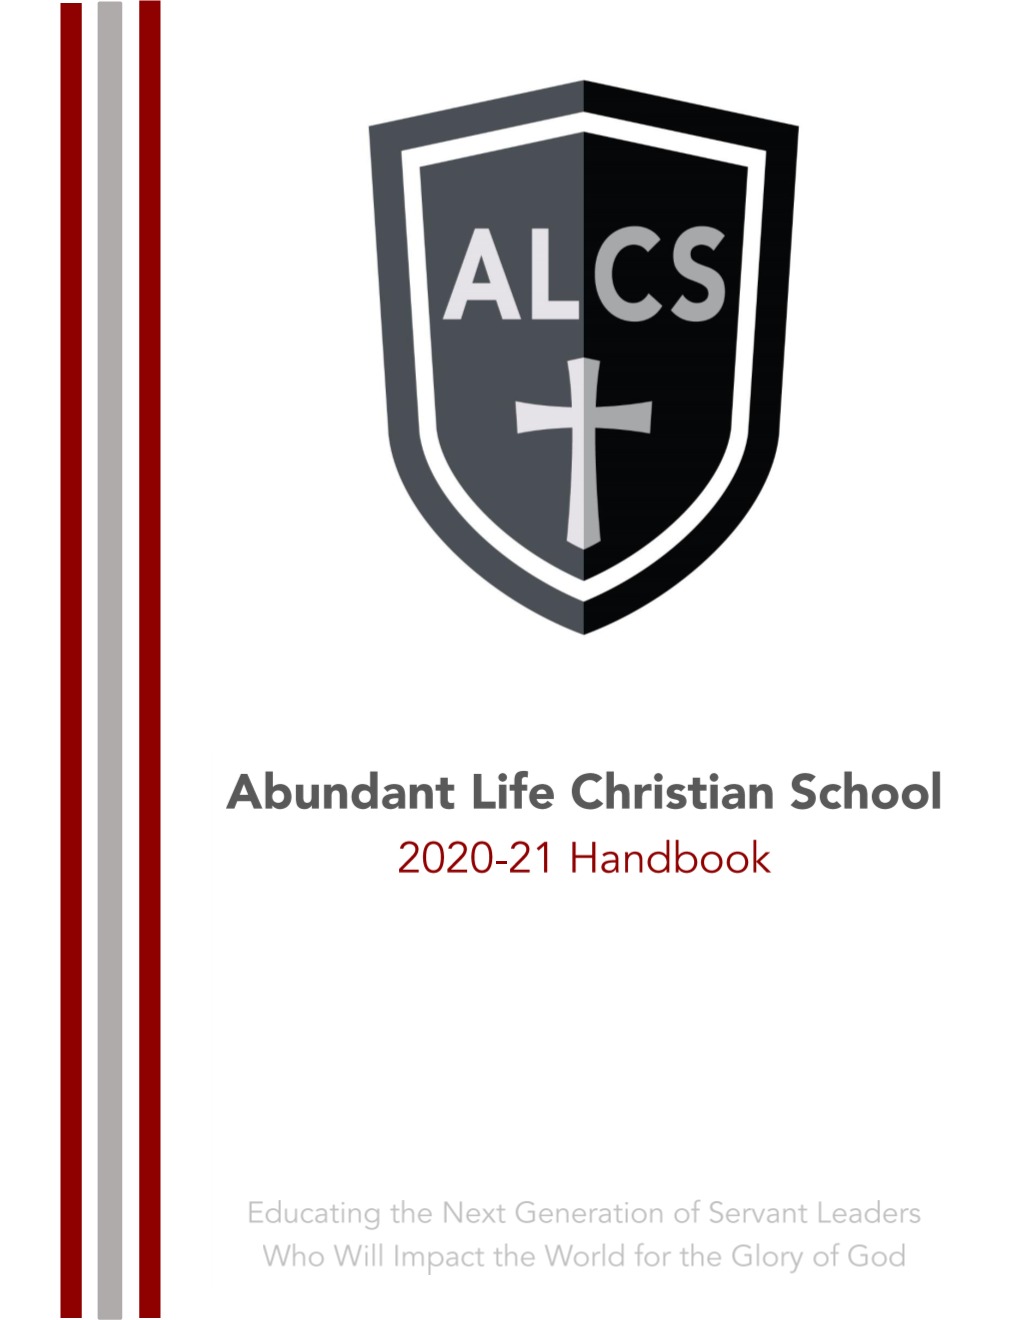 Abundant Life Christian School Services and Policies Manual